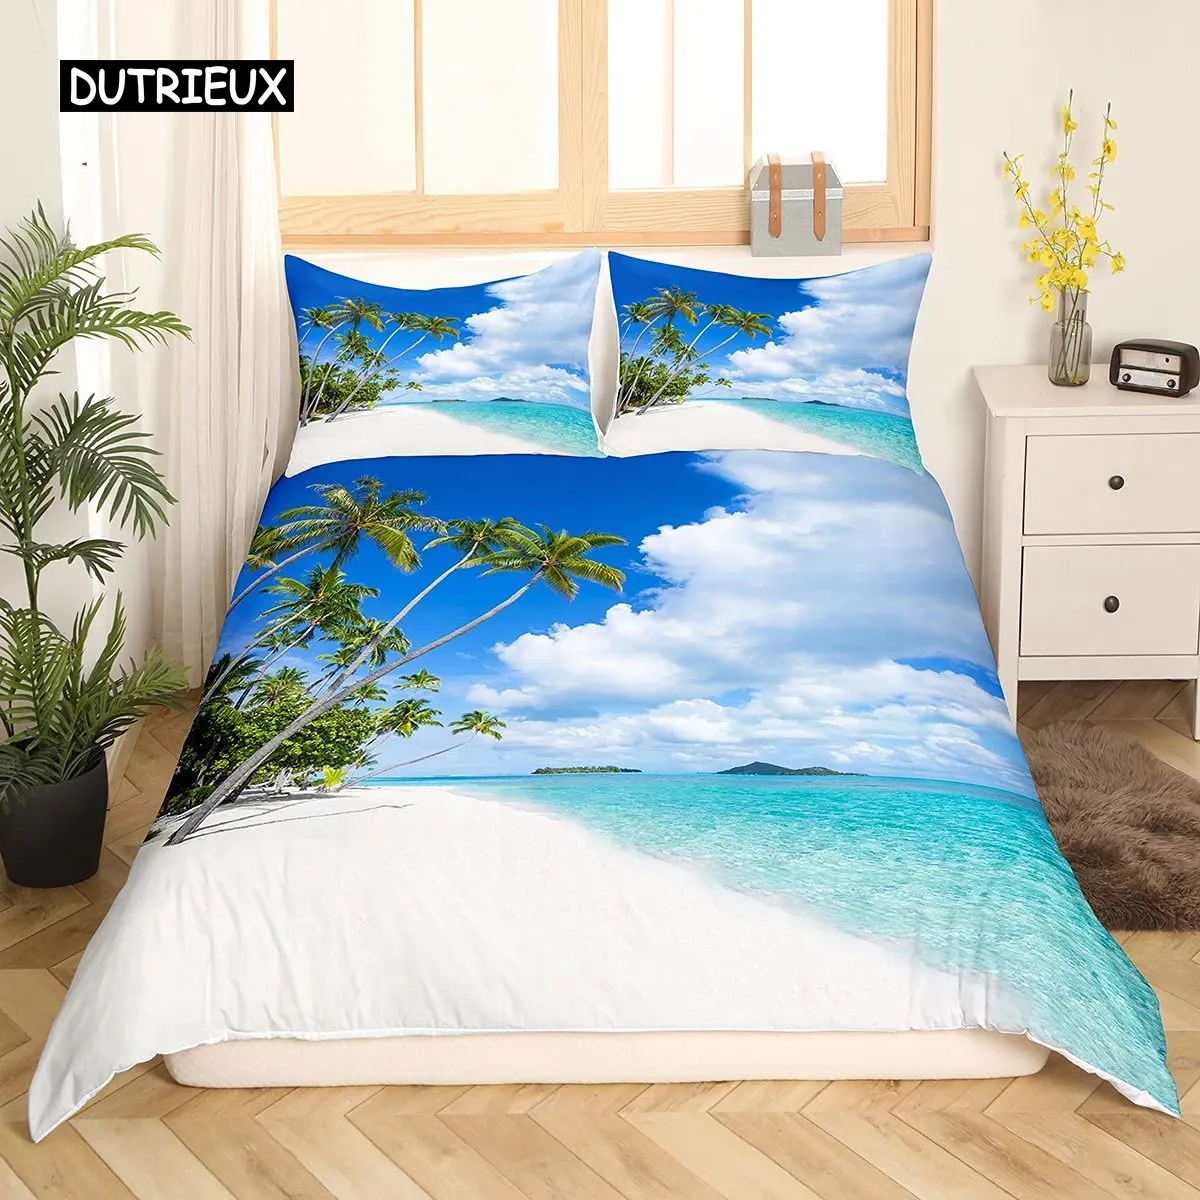 Set Beach Ocean Duvet Cover Set Hawaiian Palm Tree Waves Bedclothes Tropical Island and Sea Beach Nature Theme Polyester Qulit Cover Sheer Curtains